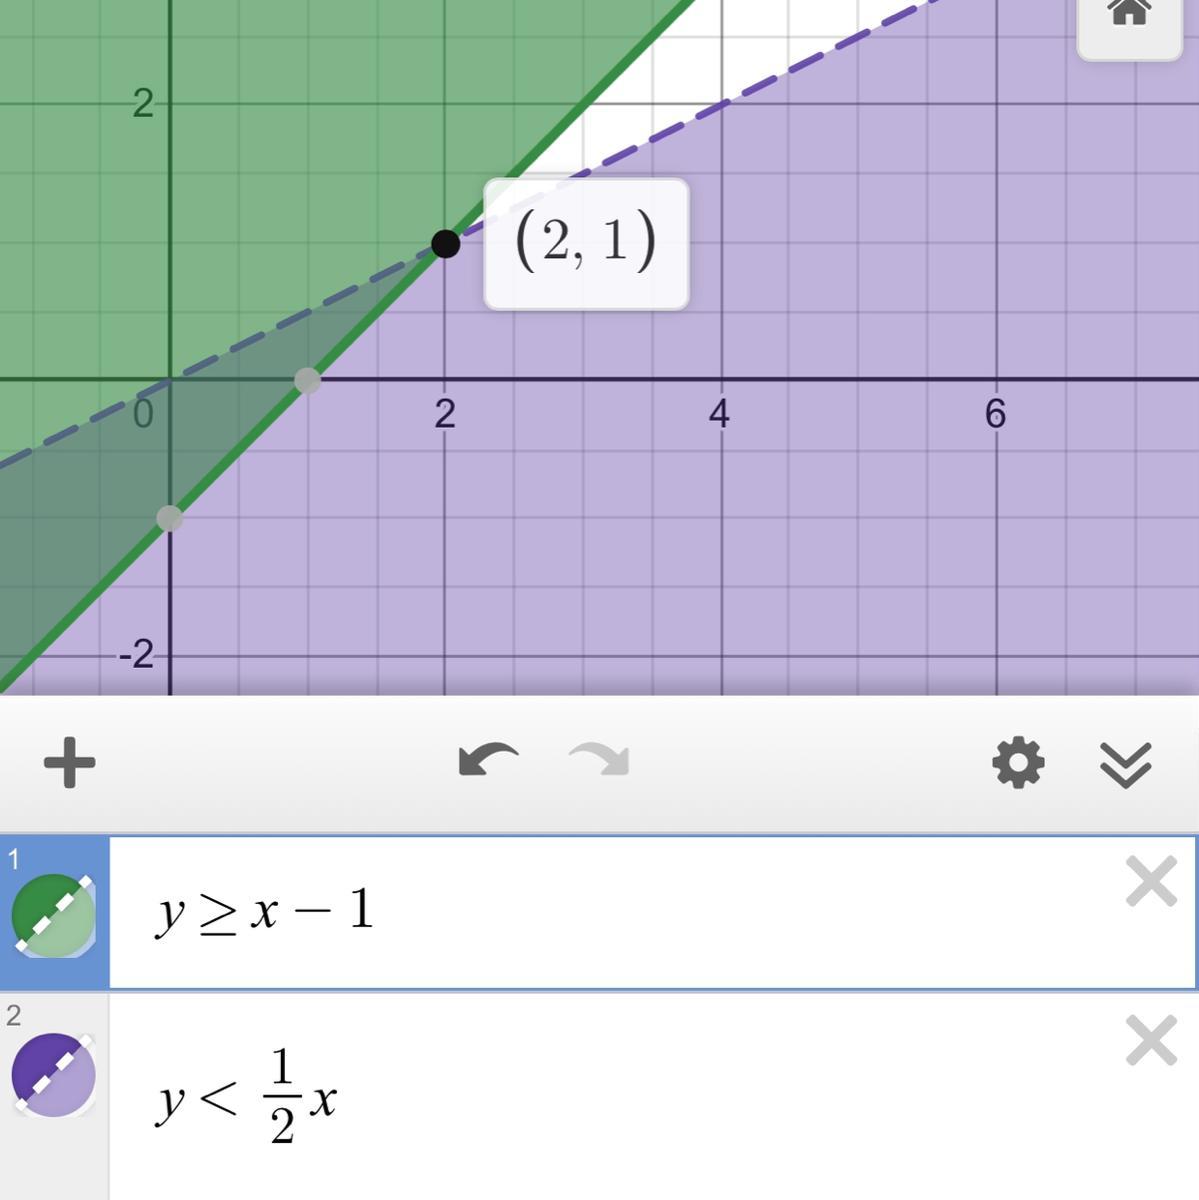 Which System Of Inequalities Has The Solution Shown In The Graph?